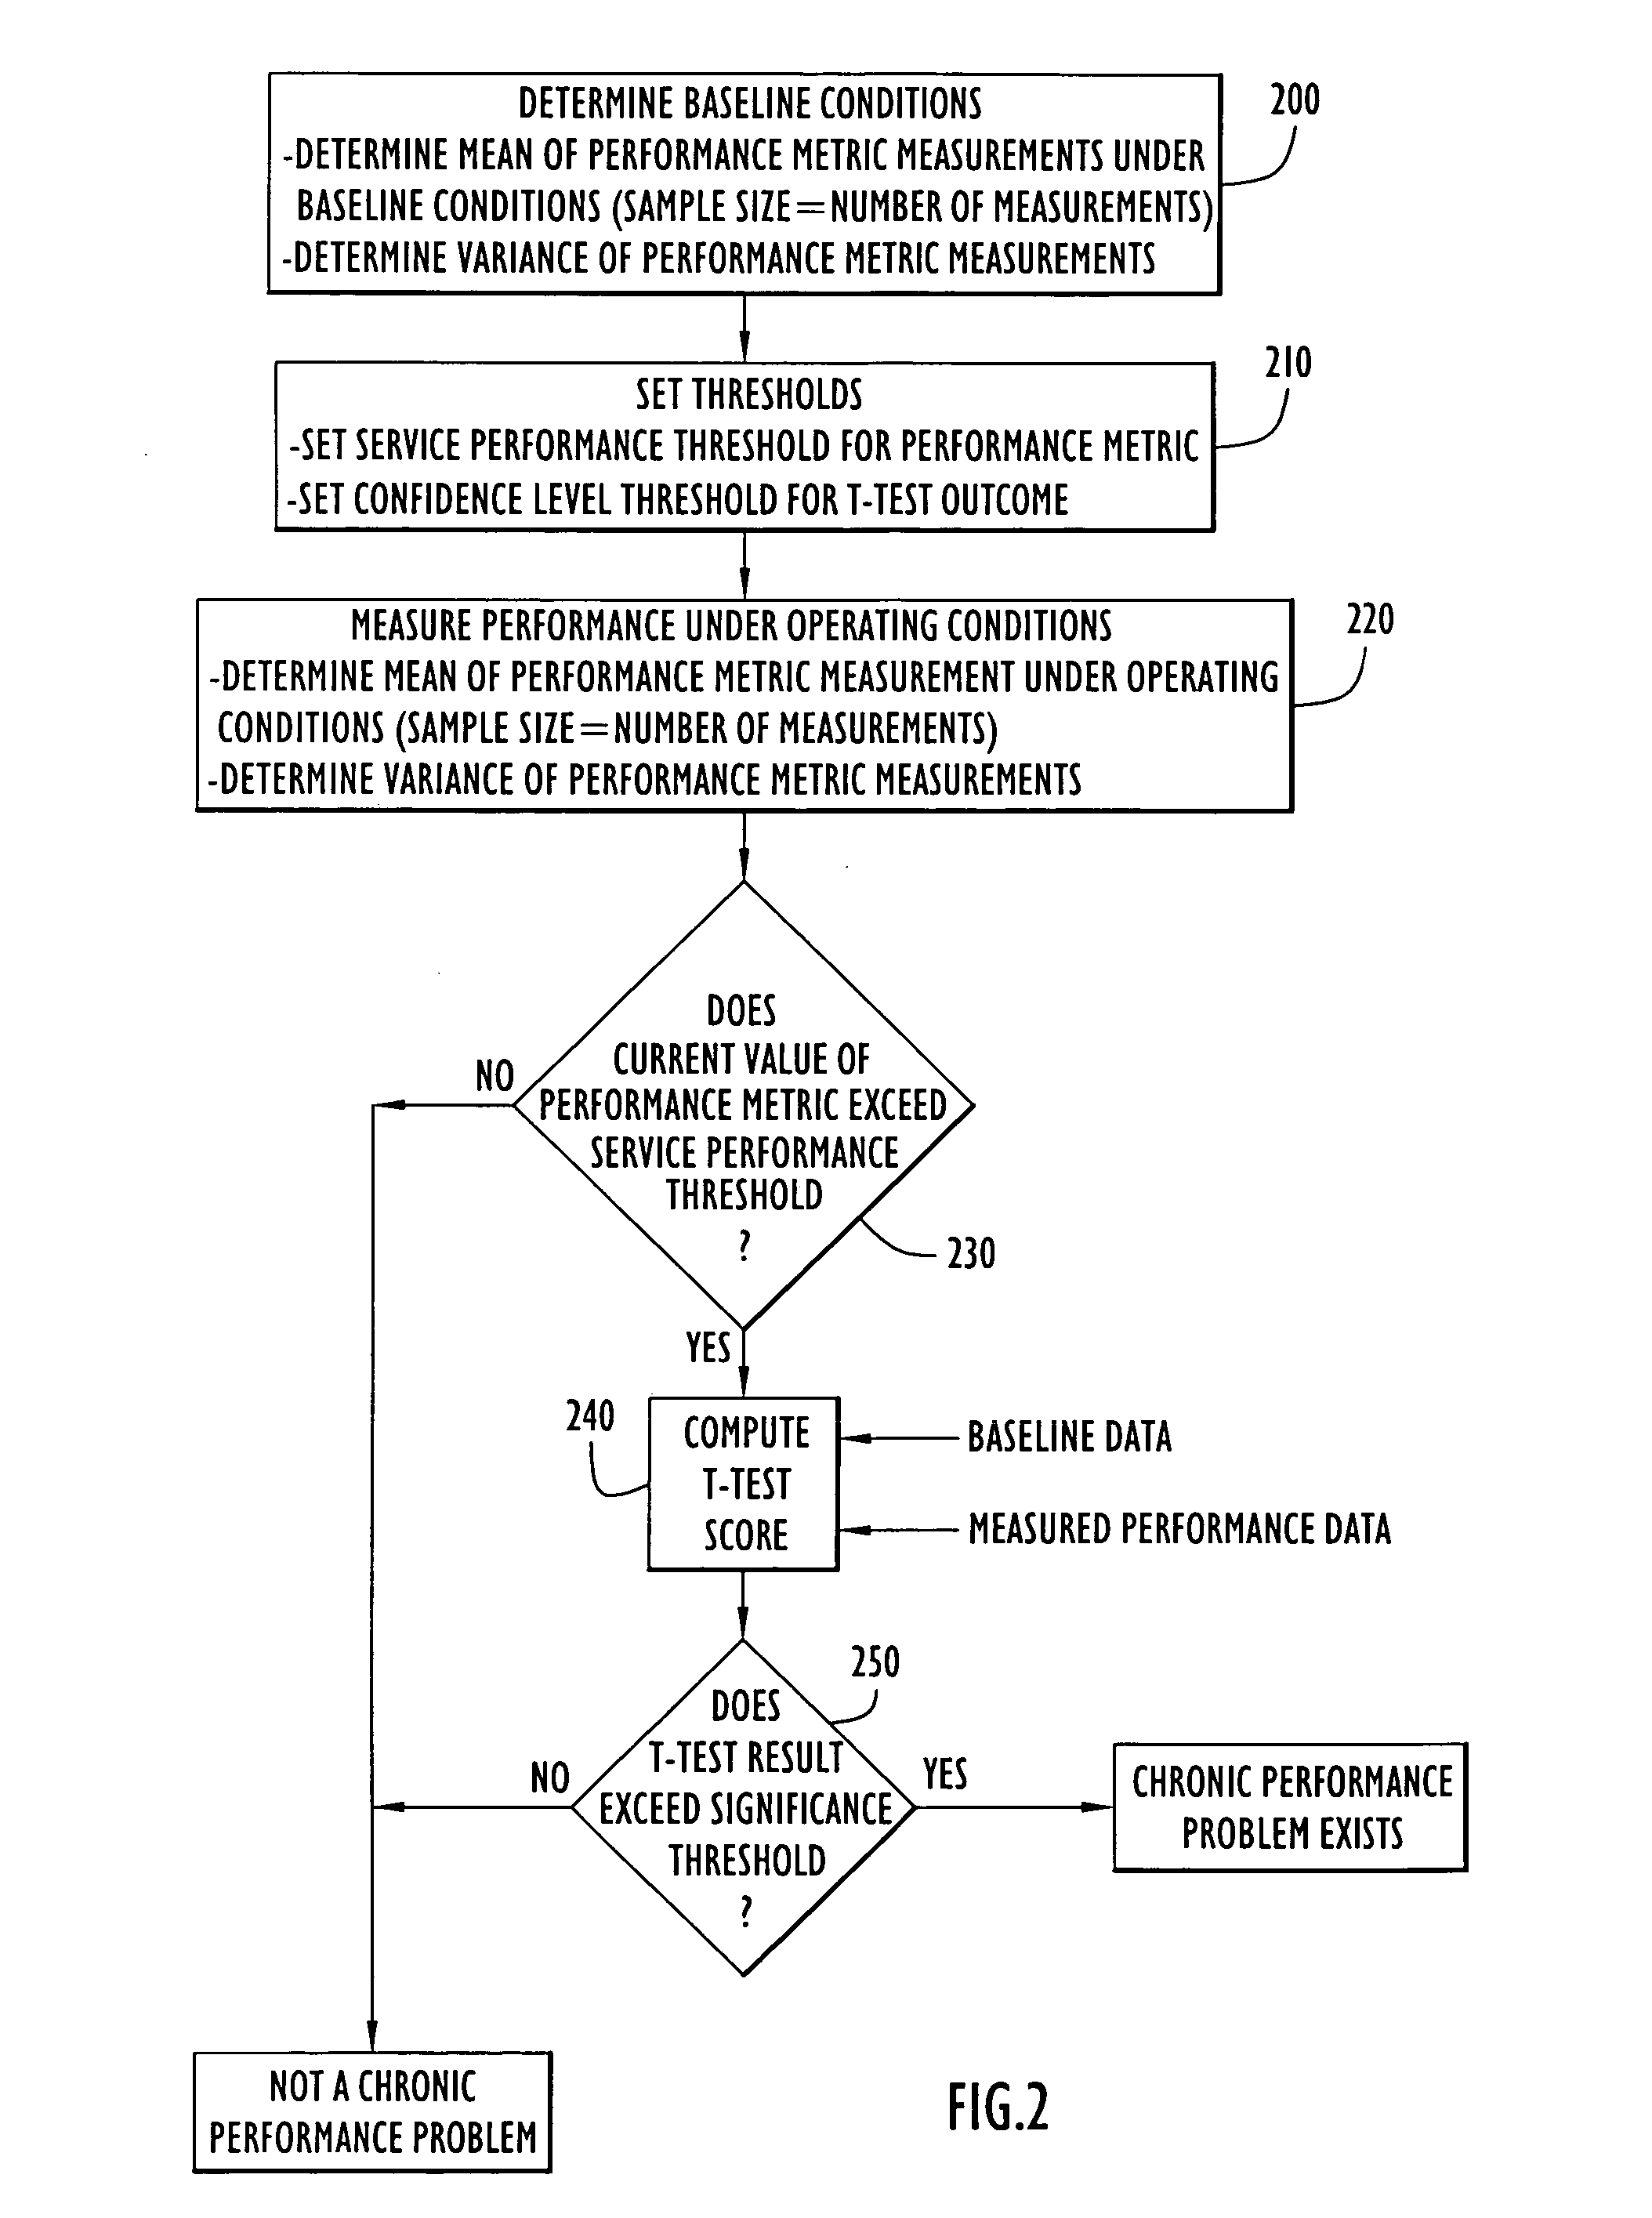 Methods and apparatus for identifying chronic performance problems on data networks